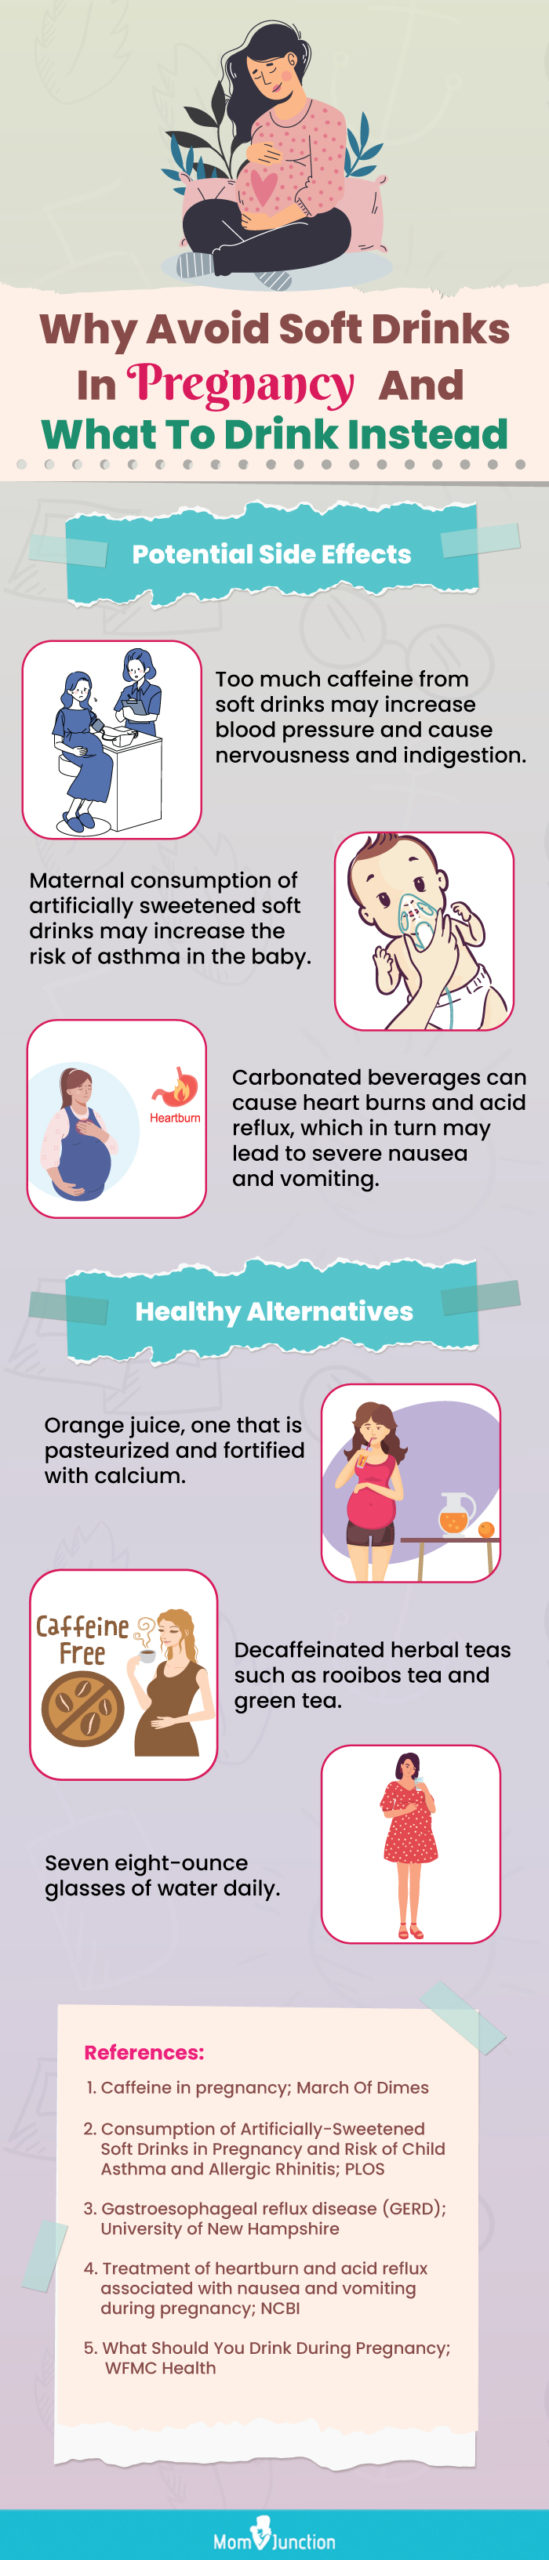 why avoid soft drinks in pregnancy and what to drink instead (infographic)